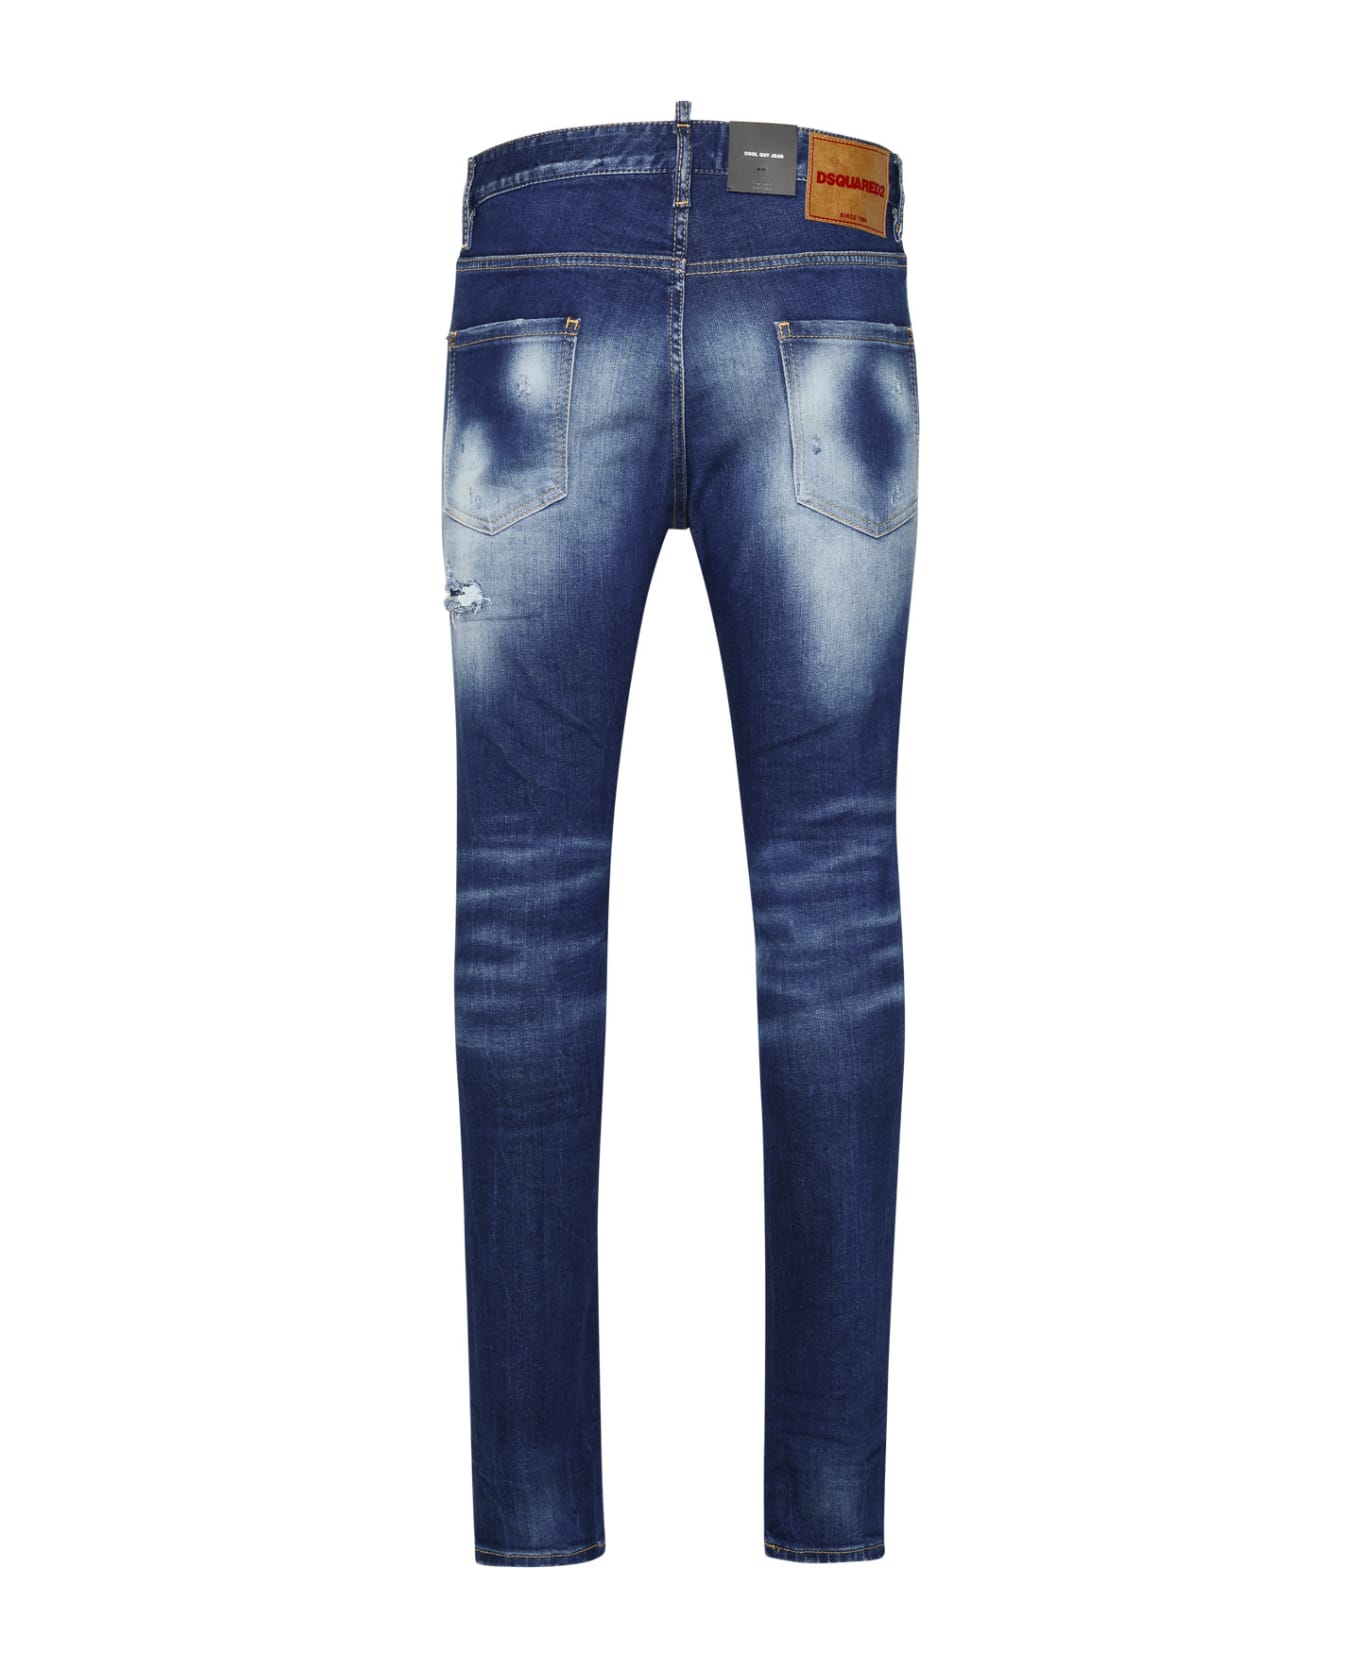 Dsquared2 Cool Guy Jean Jeans - 470